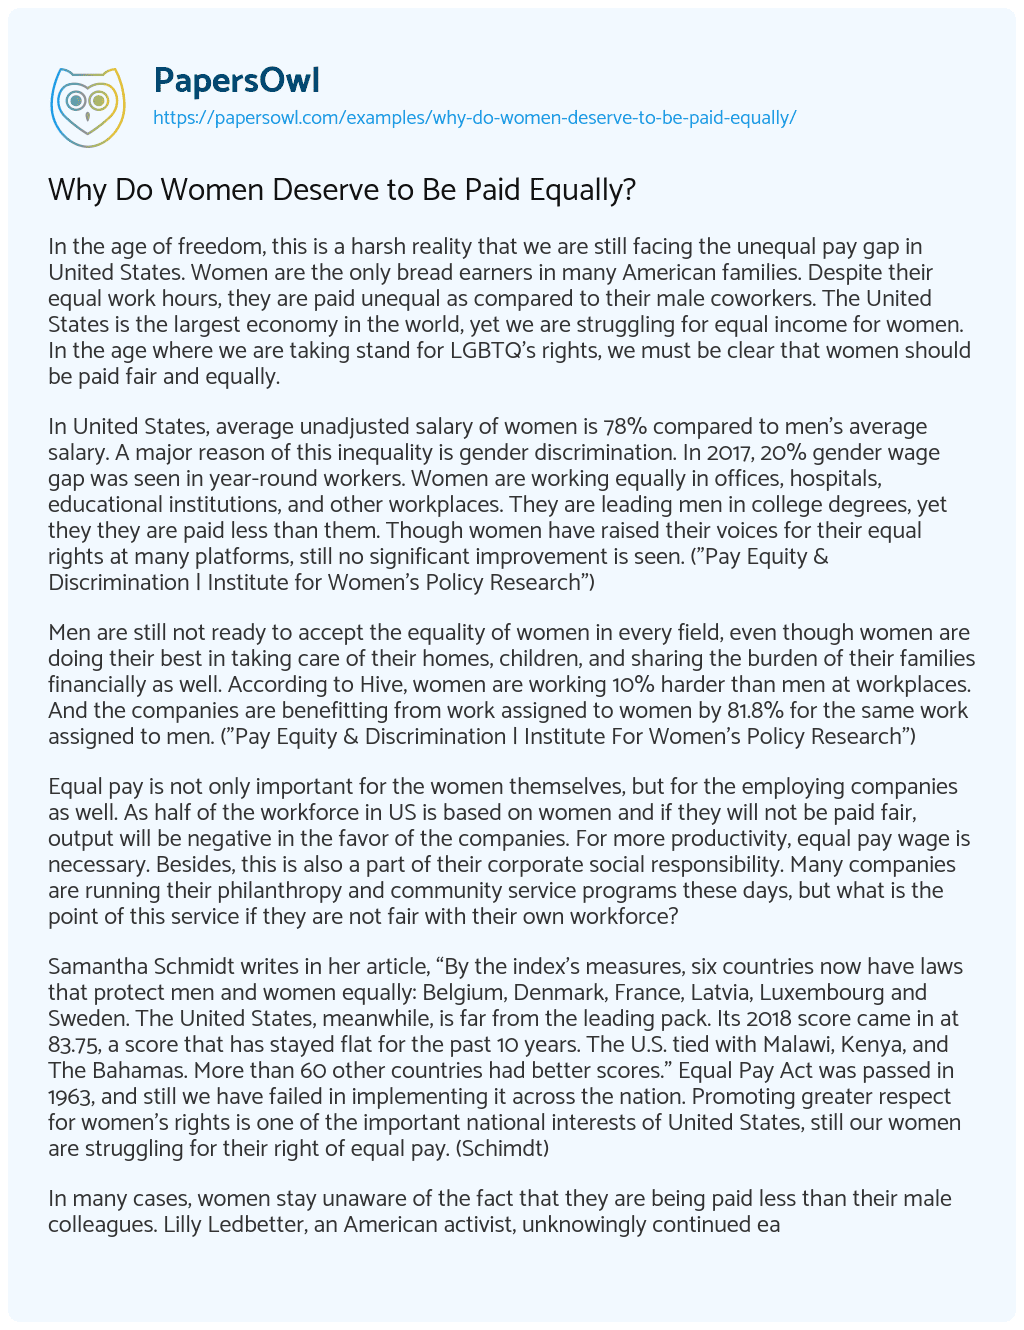 Essay on Why do Women Deserve to be Paid Equally?